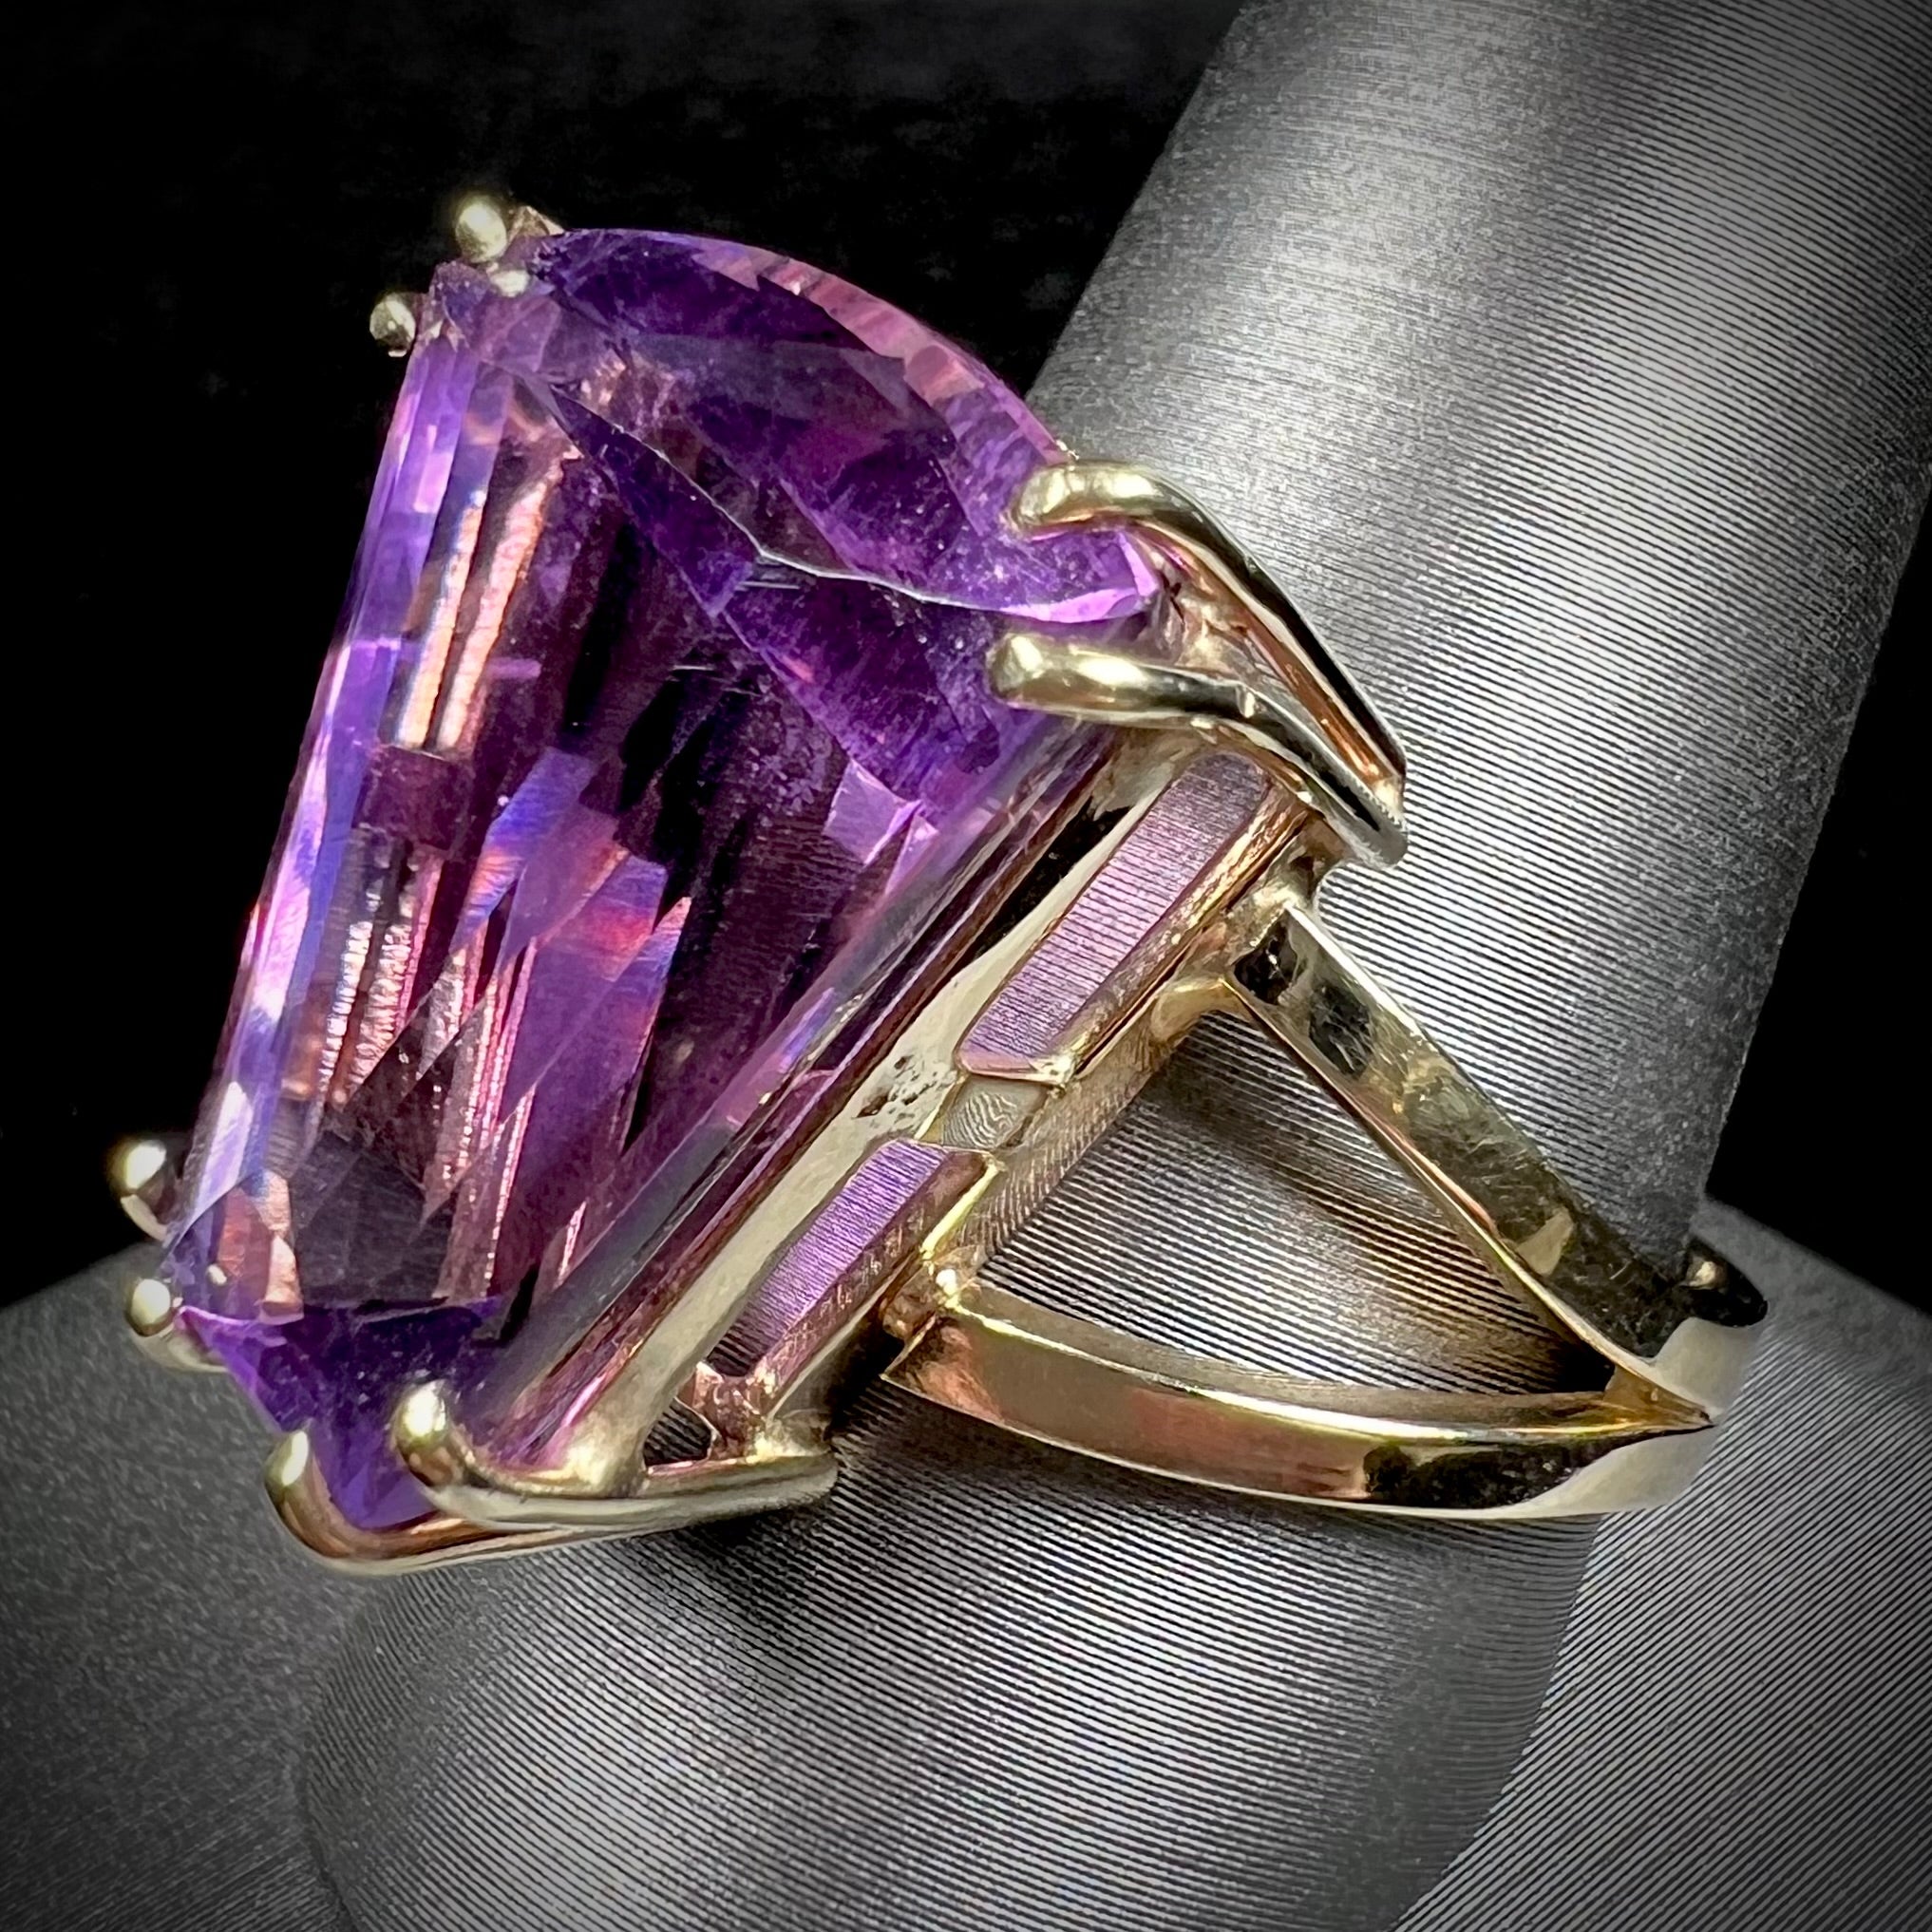 Purple Bridal Cocktail Ring7 | Jewelry, Cocktail rings, Amethyst purple